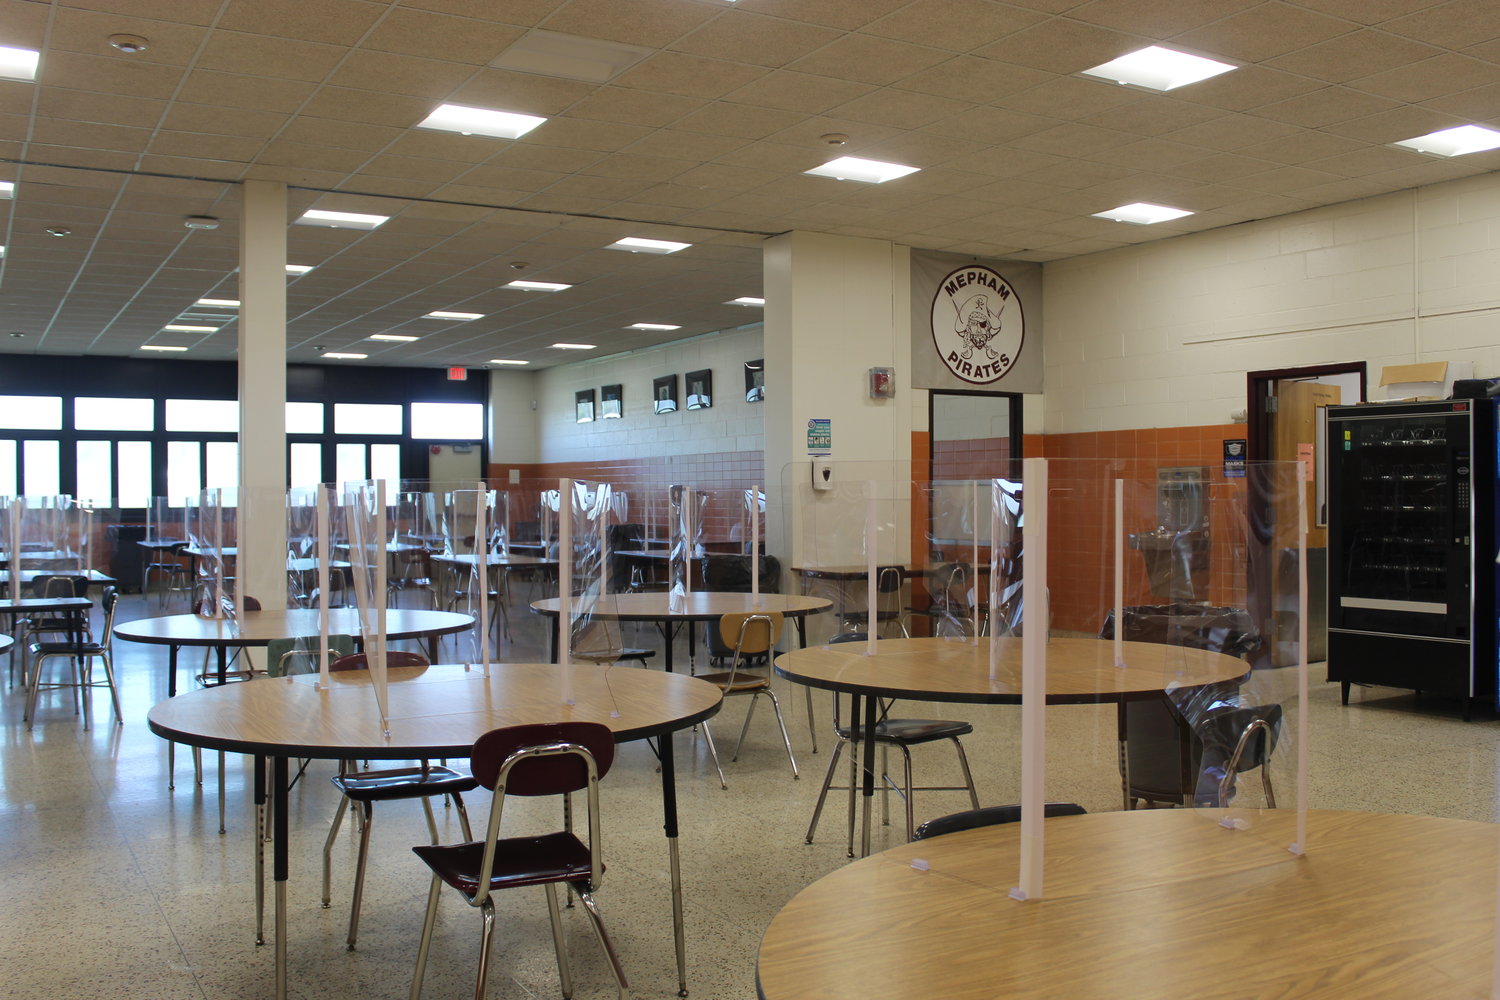 At Mepham, students can sit two to a table during lunch since each table is affixed with plastic barriers.